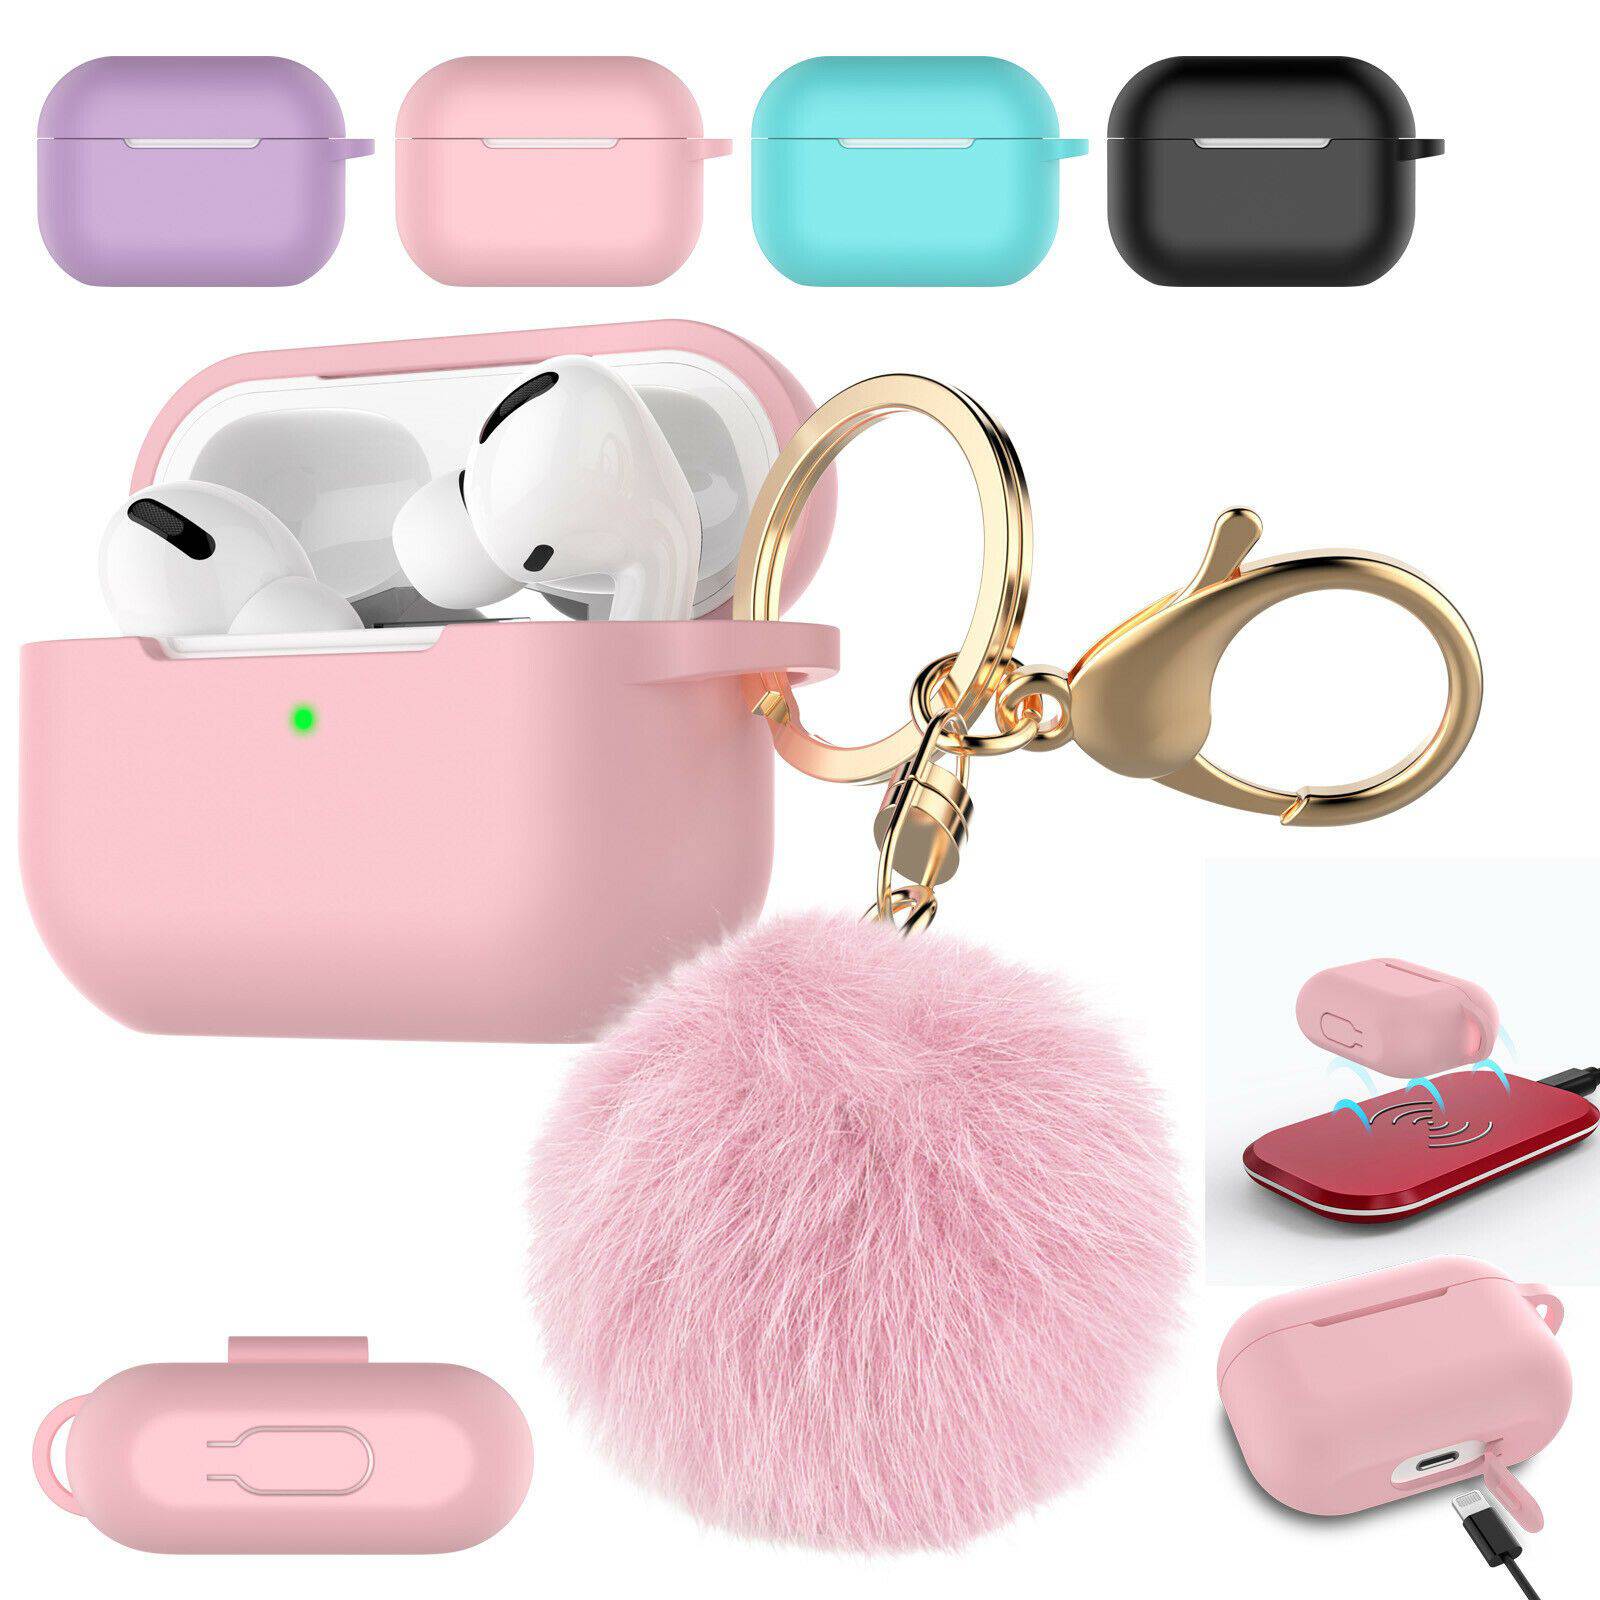 AirPods Pro Case Cover,Durable Football Design Case Cover for Earphone AirPods Pro,with Keychain Front Keychain Visible